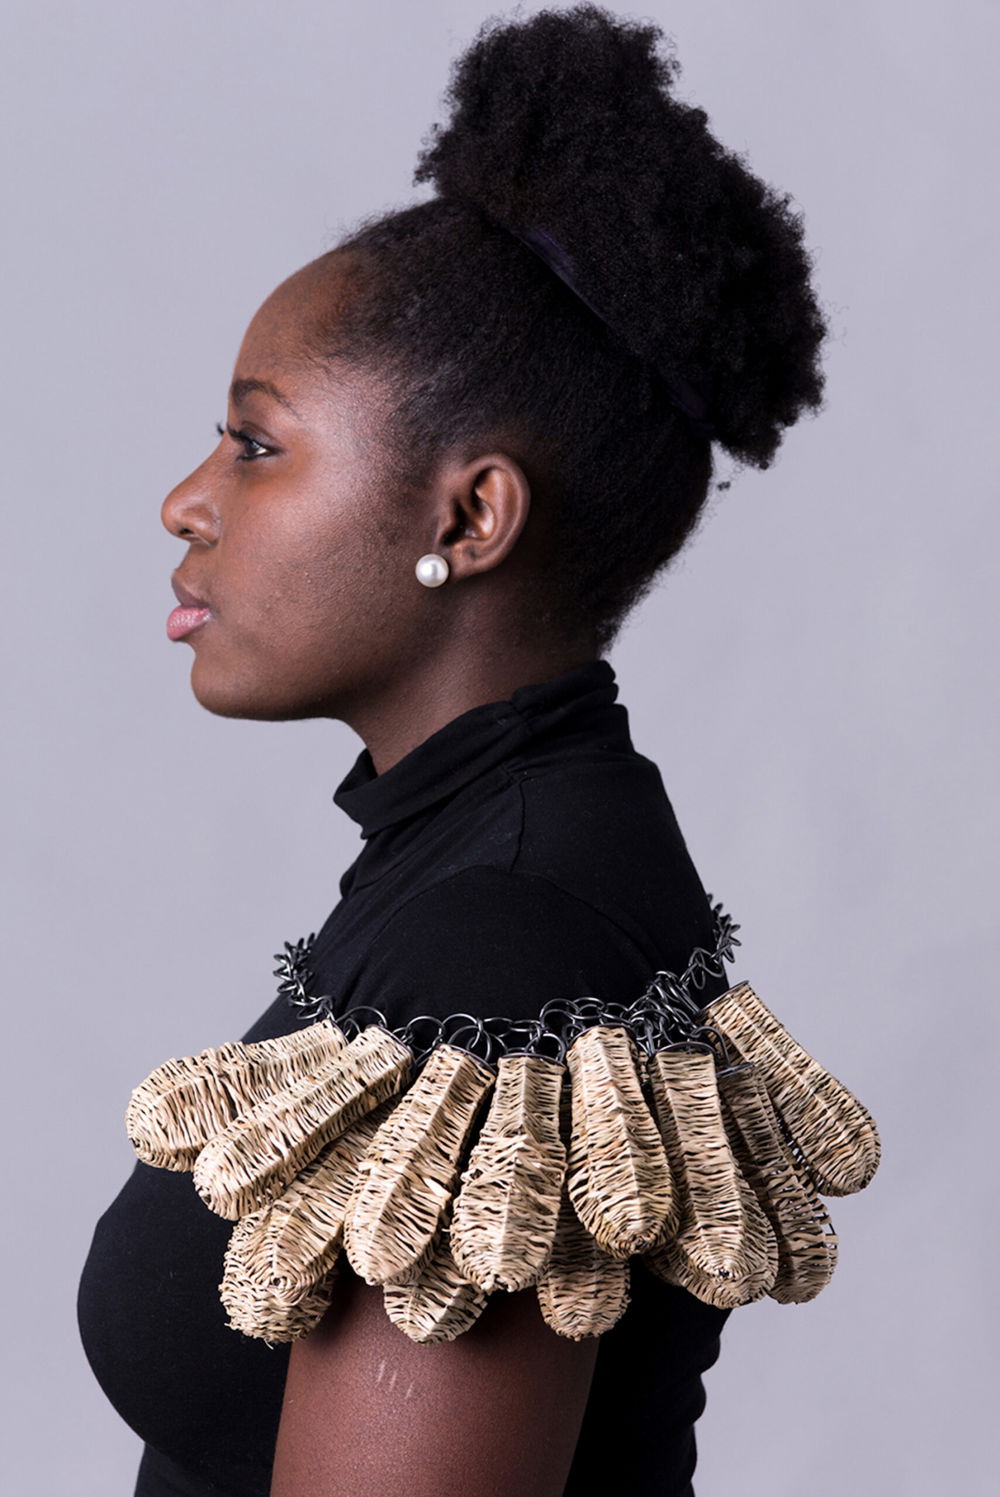 A dark-skinned person is photographed against a gray backdrop. They are captured from their left side profile and are dressed in a plain black T-shirt. A sterling silver corded necklace resembling a telephone cord rests just beneath their shoulders. On the left side of the wire, a cluster of oblong woven sea grass and 14 nu-gold pendants hang and rest over their shoulder.